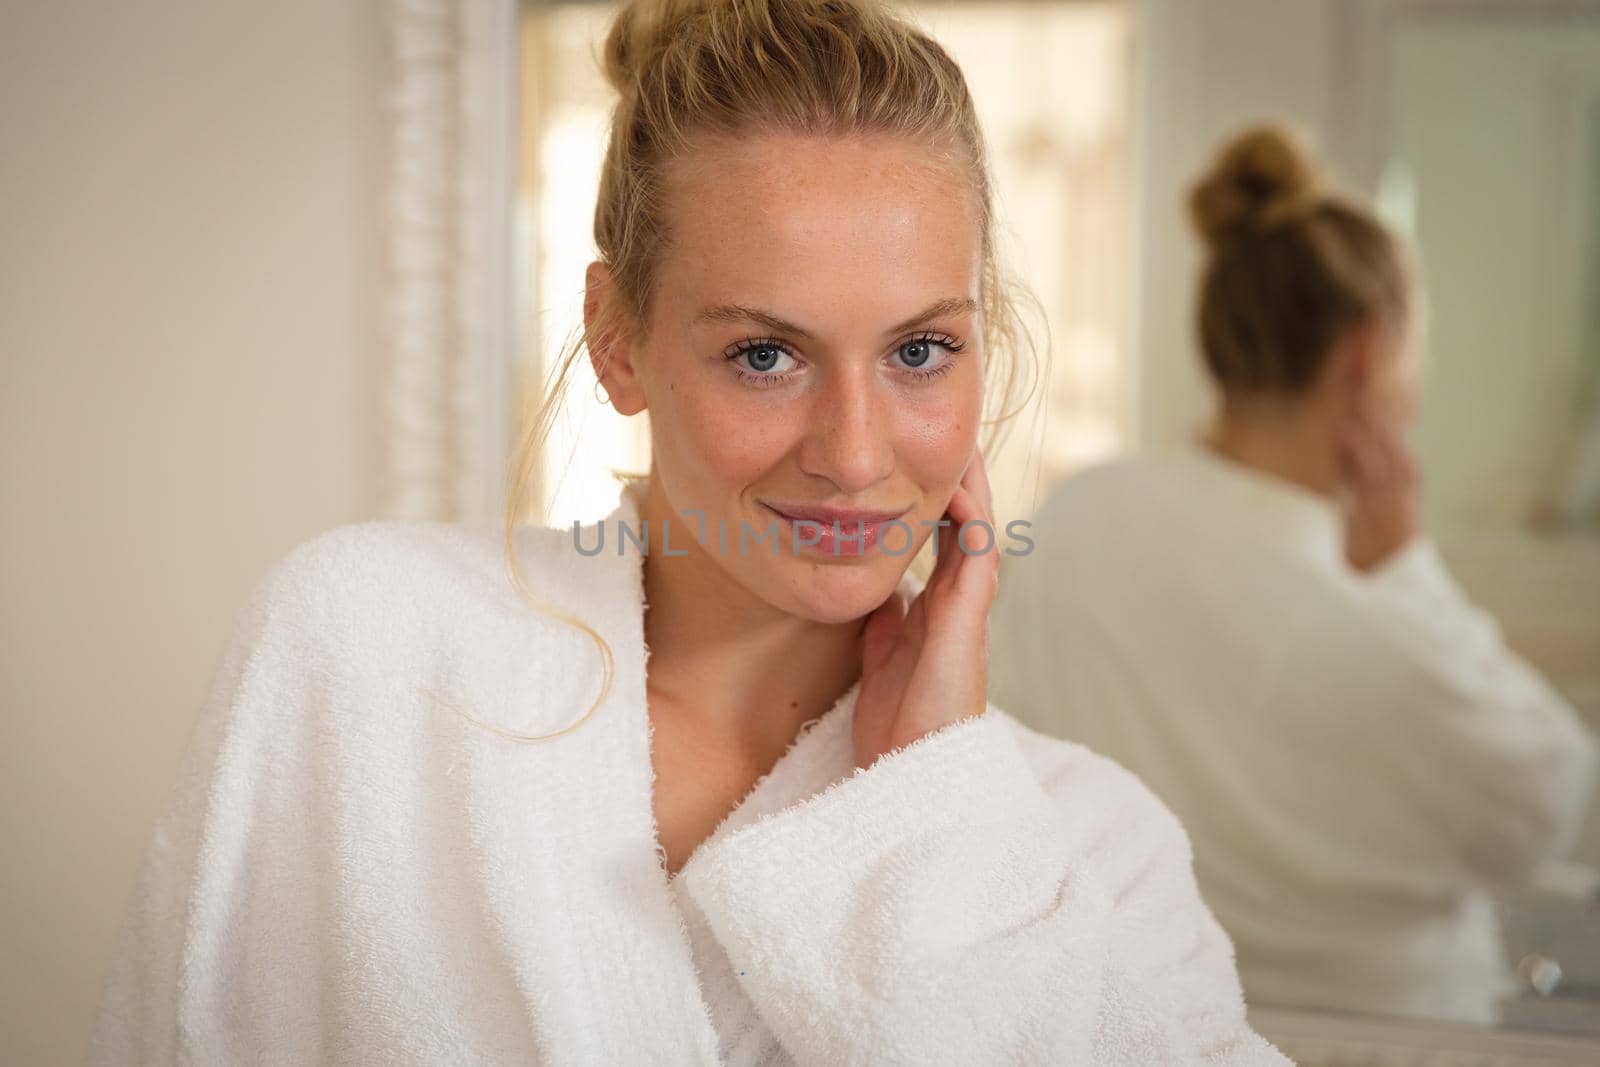 Portrait of smiling caucasian woman standing in bathroom wearing bathrobe. health, beauty and wellbeing, spending quality time at home.